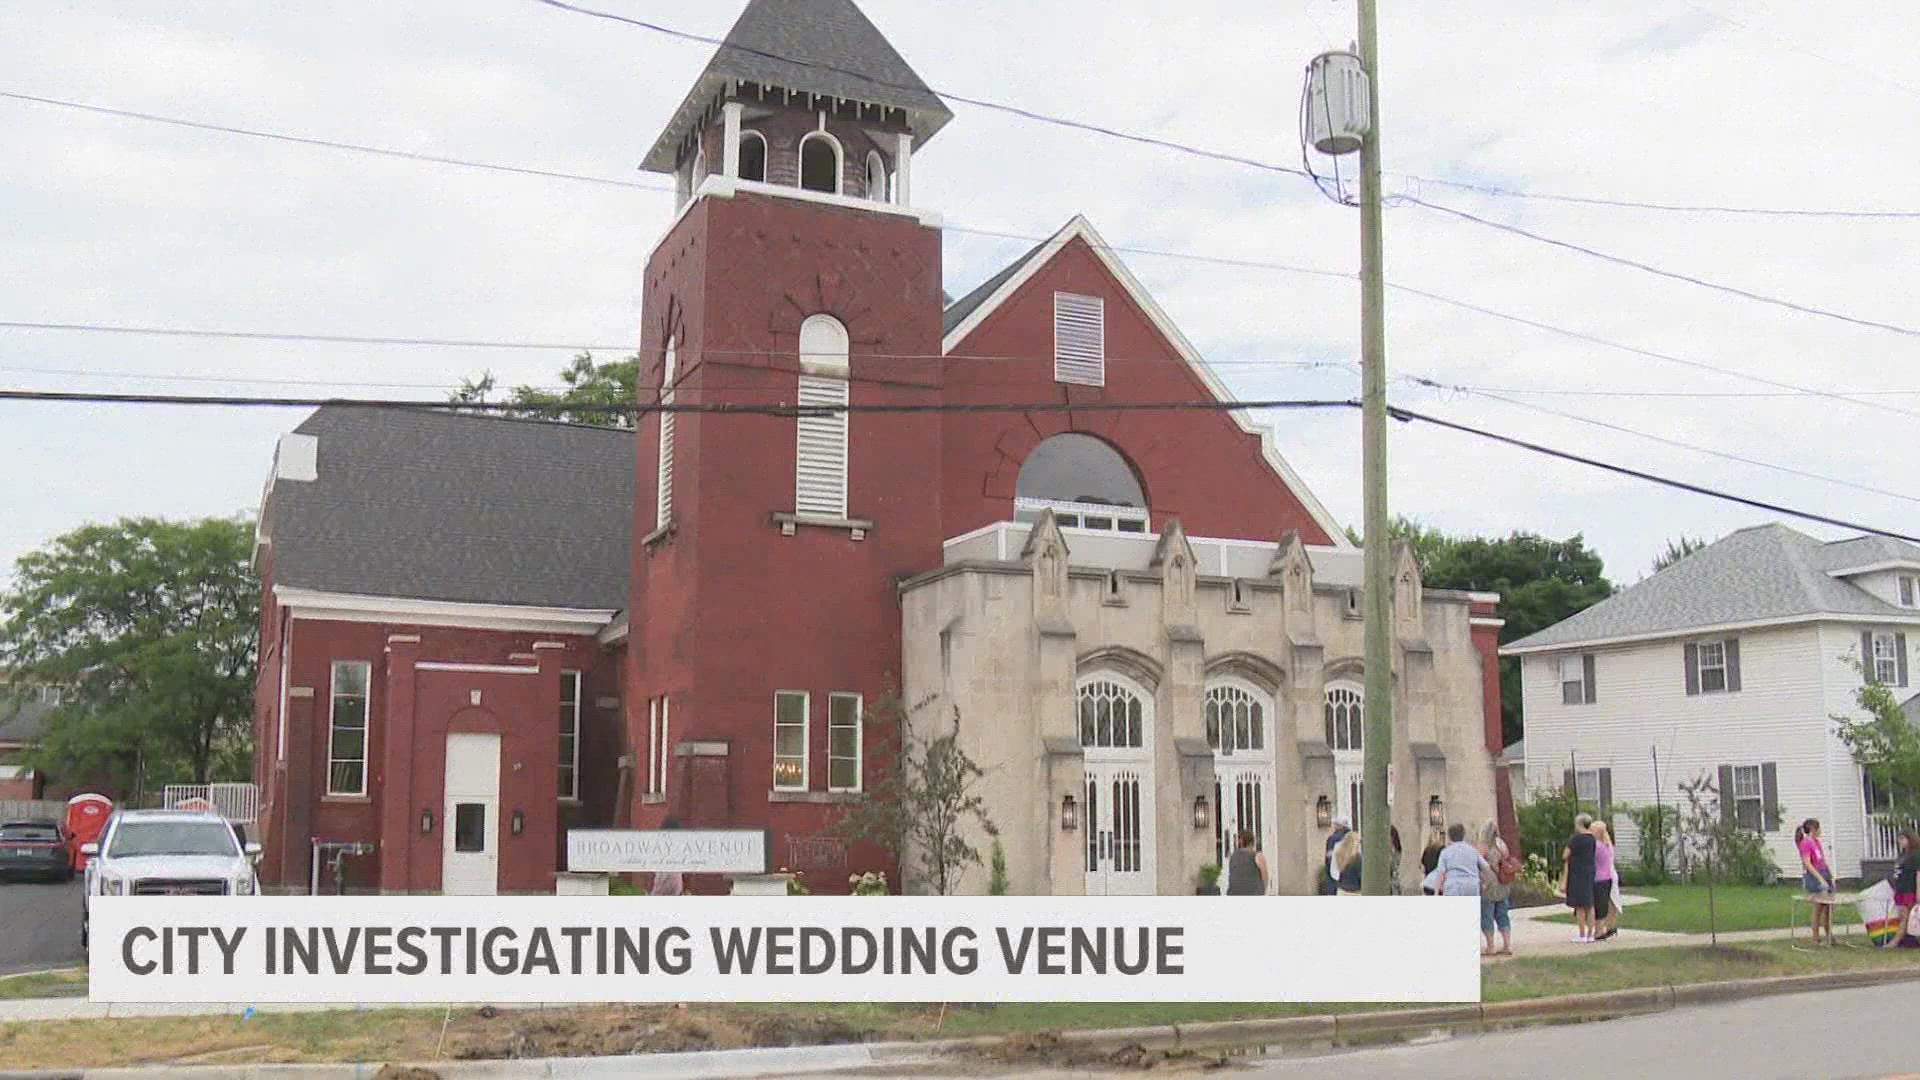 A group of protestors gathered outside The Broadway Avenue Wedding and Event Venue Monday night after owners said they will not host gay weddings.